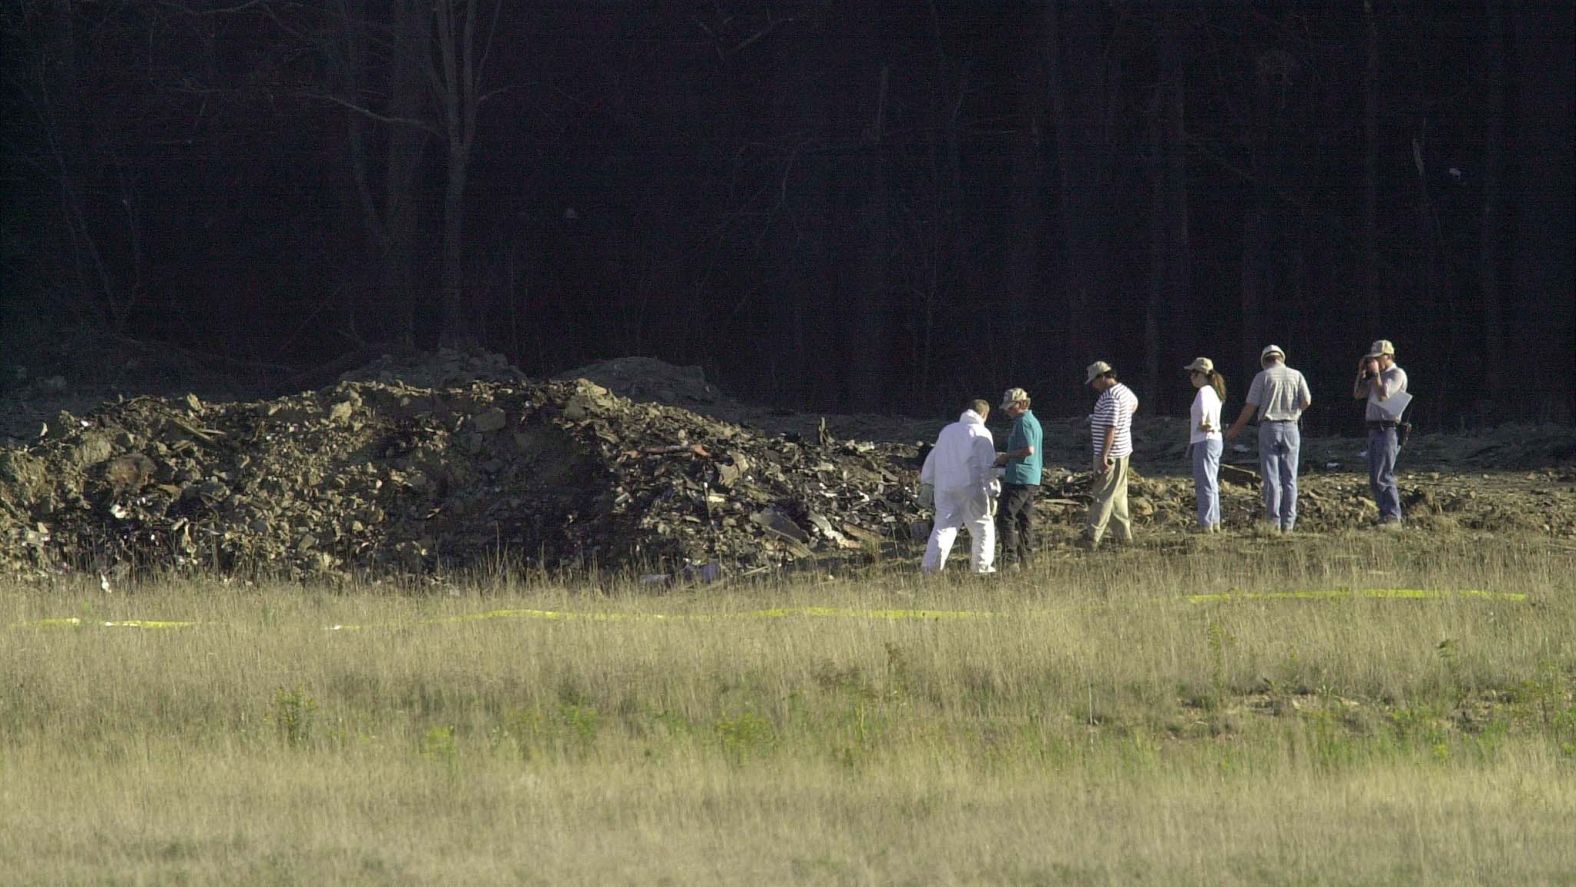 At 10:03 a.m., United Airlines Flight 93 — traveling from Newark, New Jersey, to San Francisco — crashed in a field near Shanksville, Pennsylvania. It is believed that the hijackers crashed the plane in that location, rather than their unknown target, after the passengers and crew tried to retake control of the flight deck.